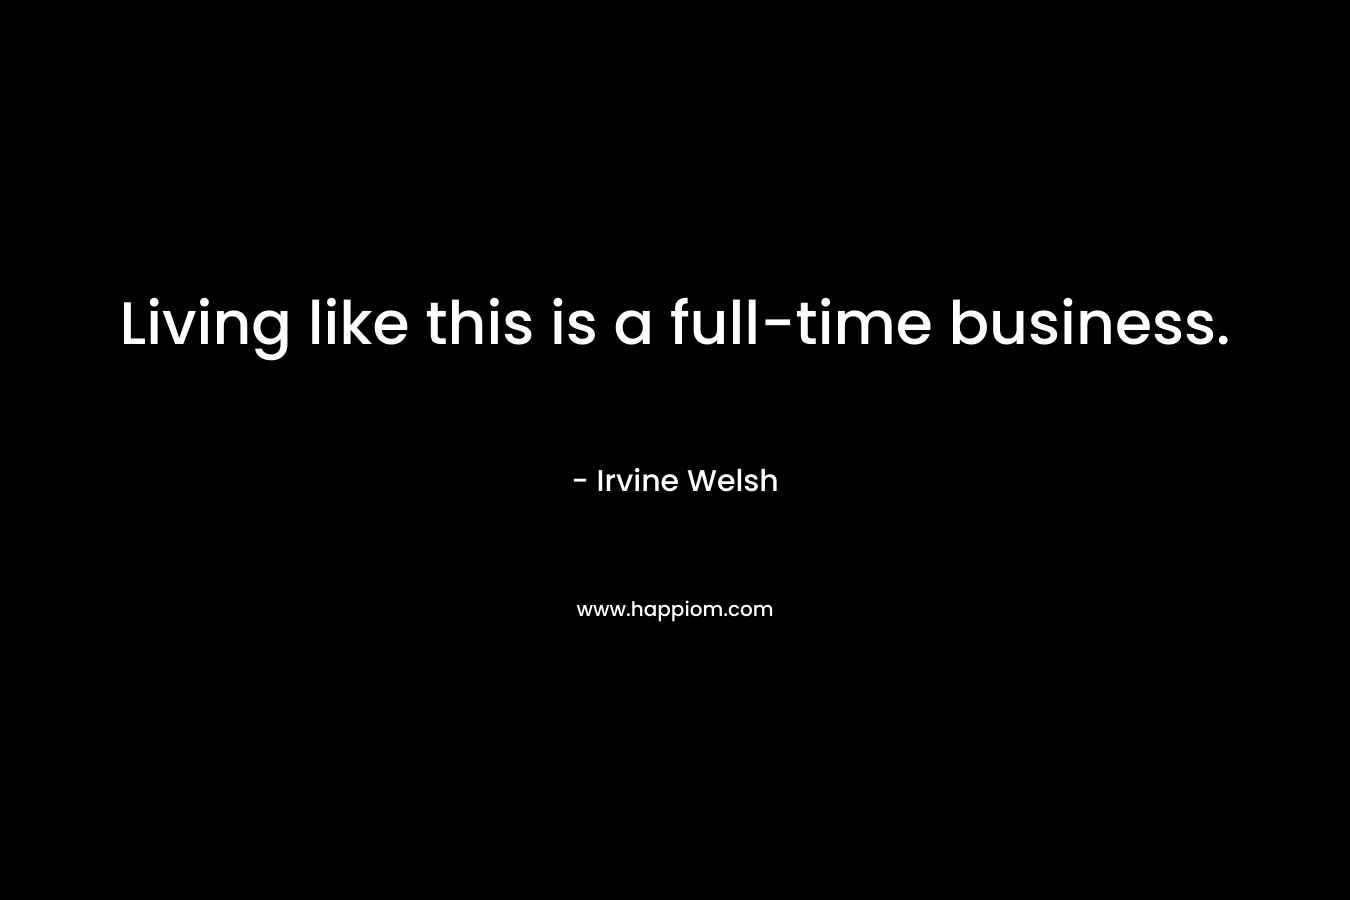 Living like this is a full-time business. – Irvine Welsh